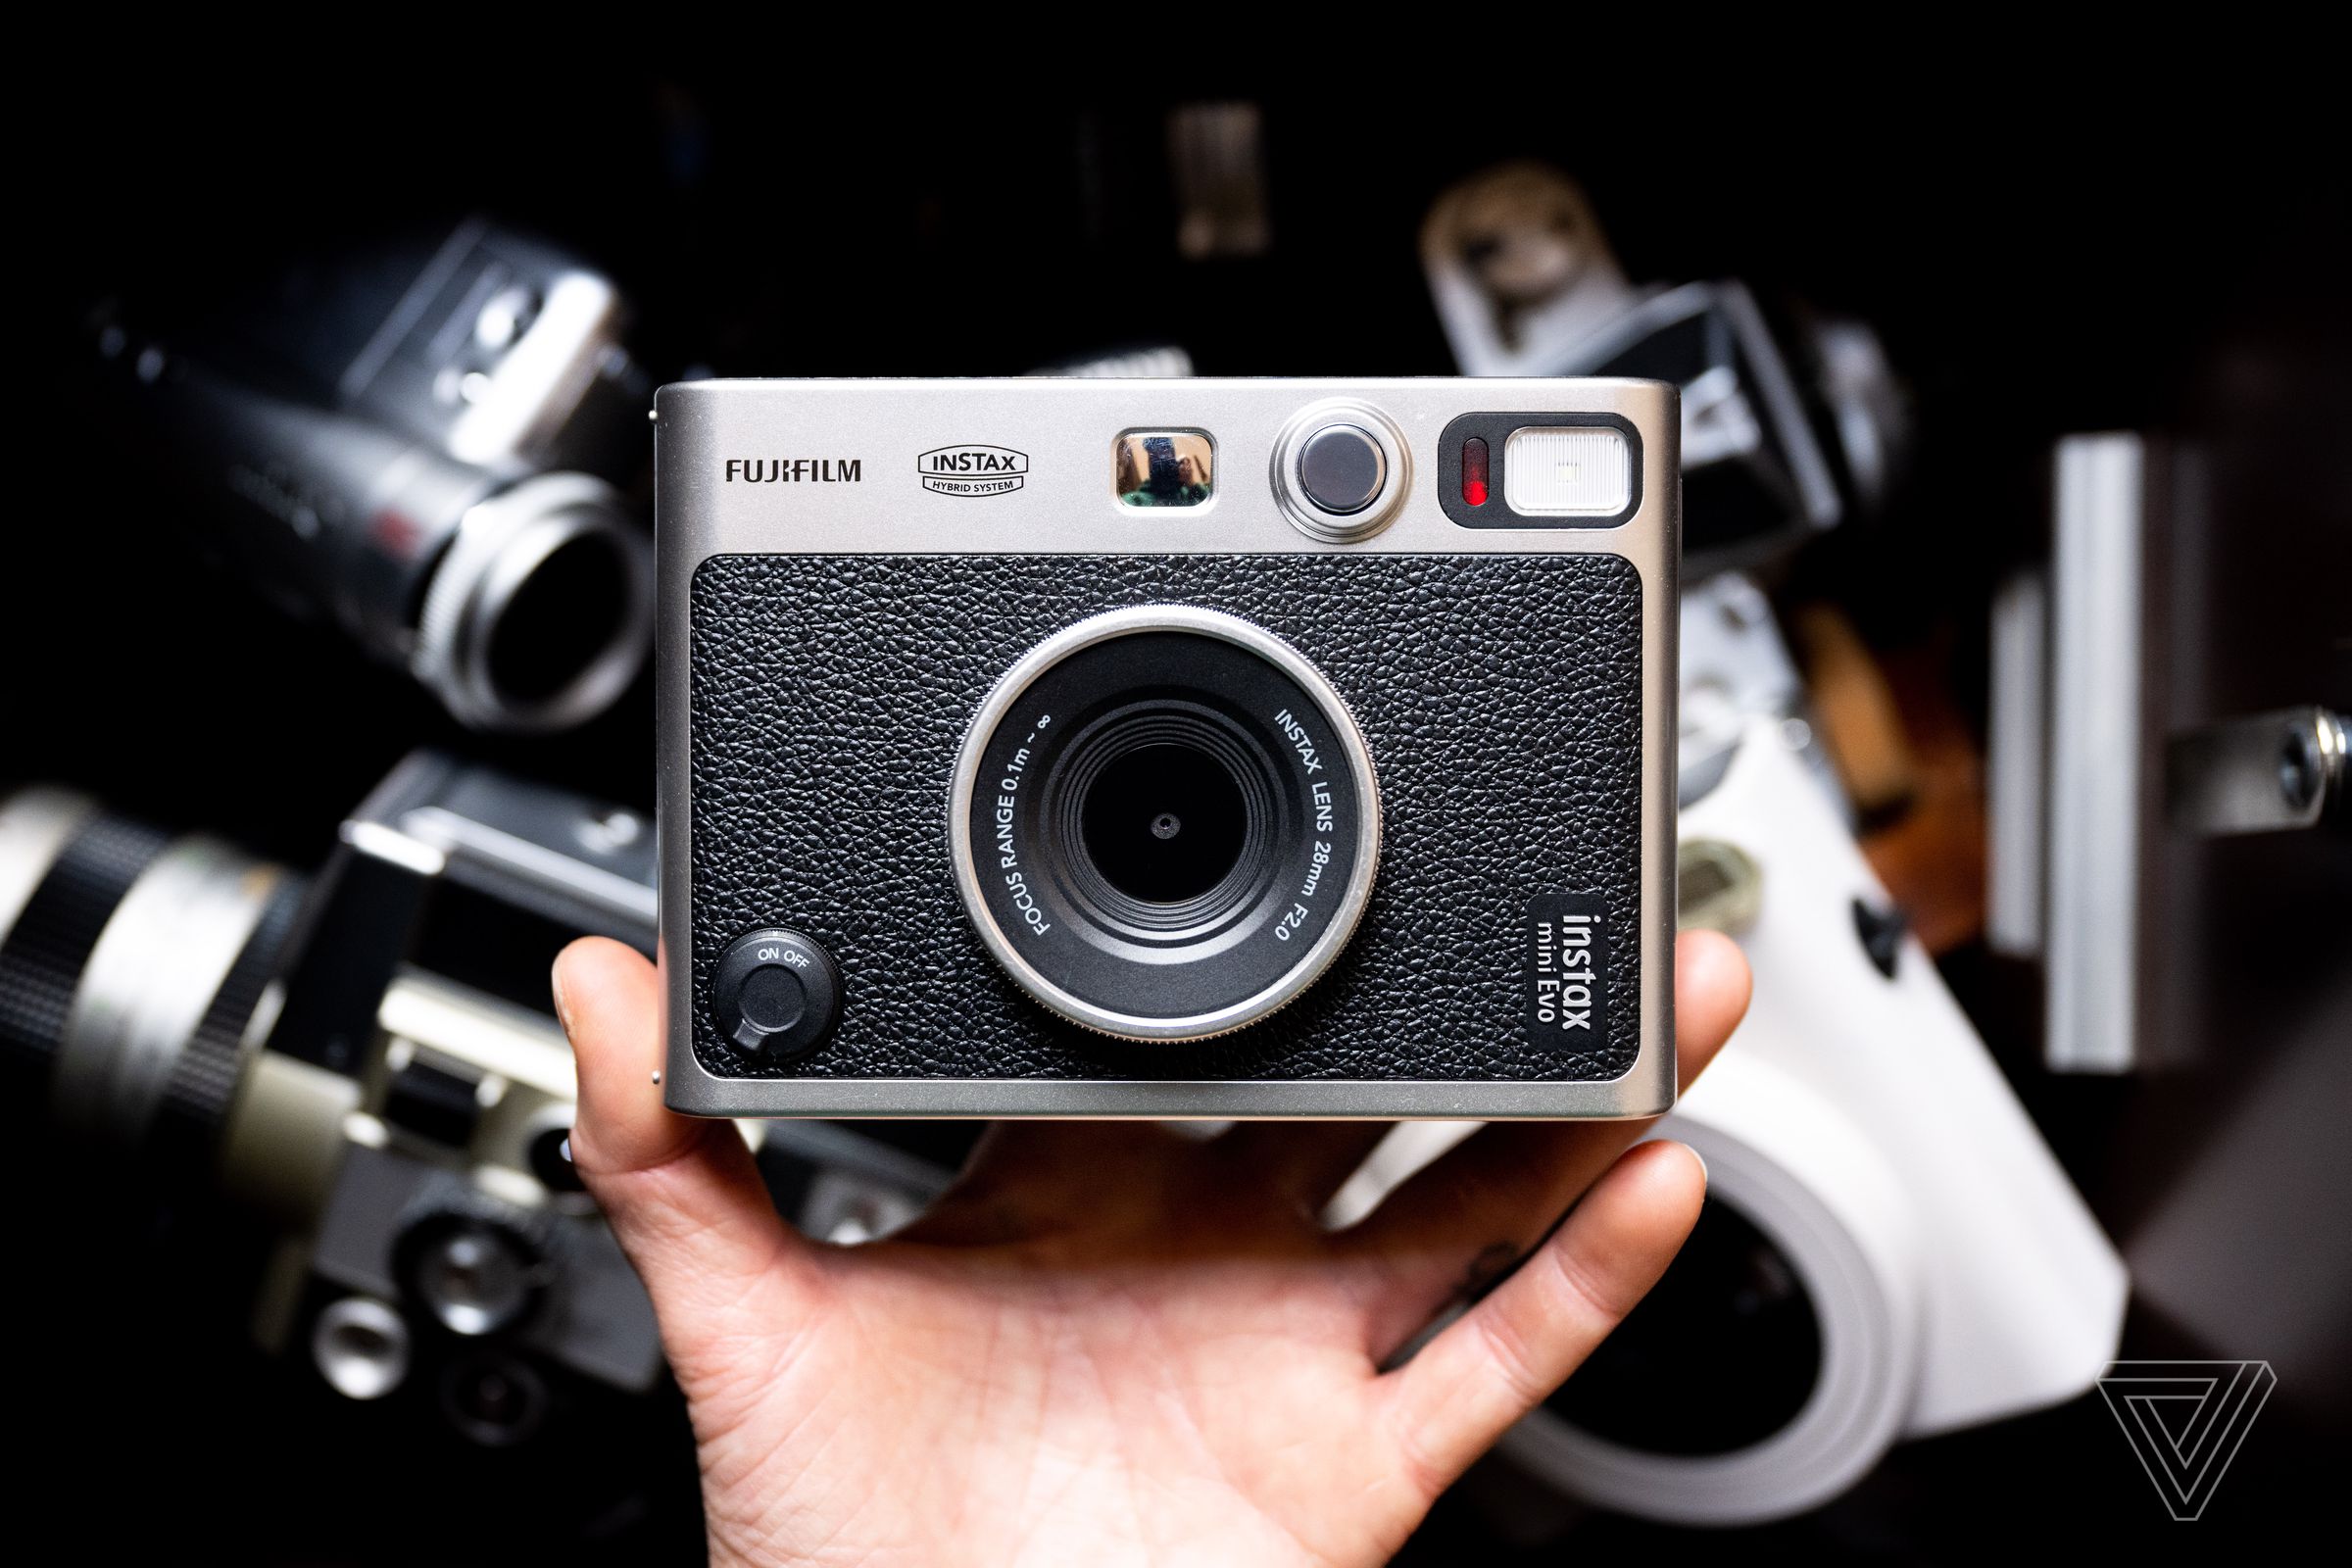 The Instax Mini Evo being held up with a hand against a dark background with cameras that are out of focus.